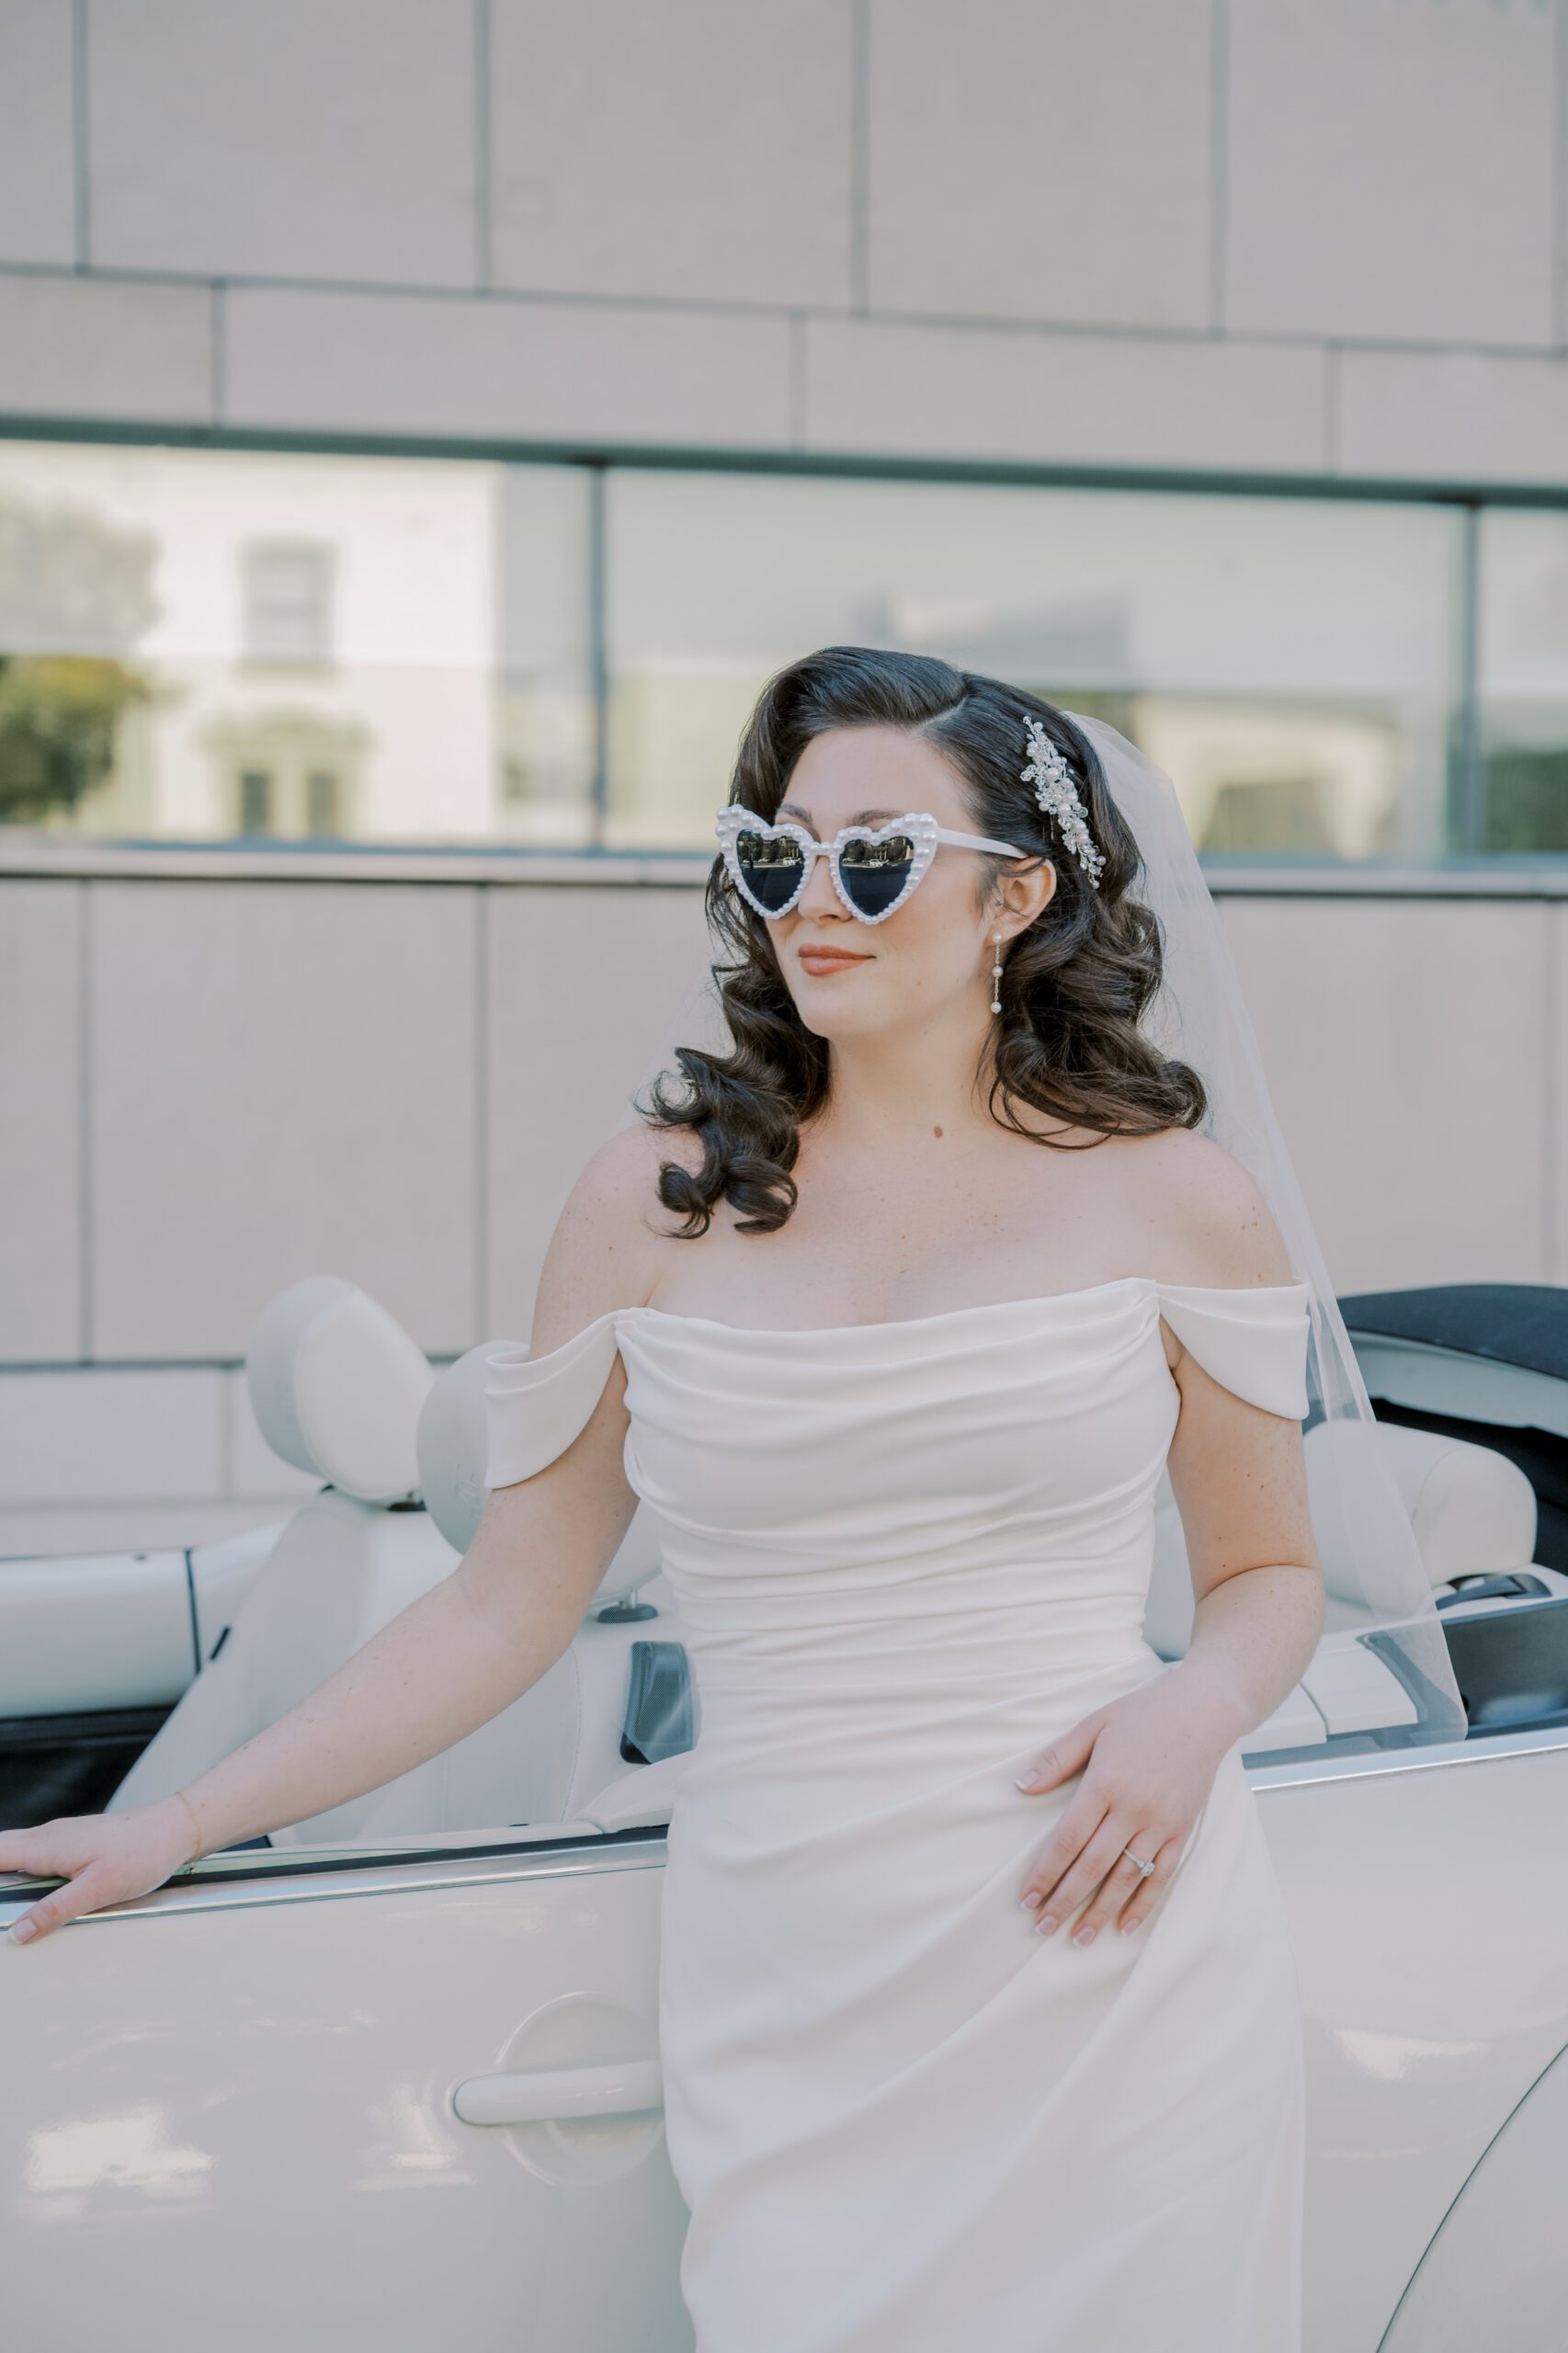 Bride standing in front of white convertible car looking off into the distance wearing white heart shaped sunglasses, her wedding dress and veil